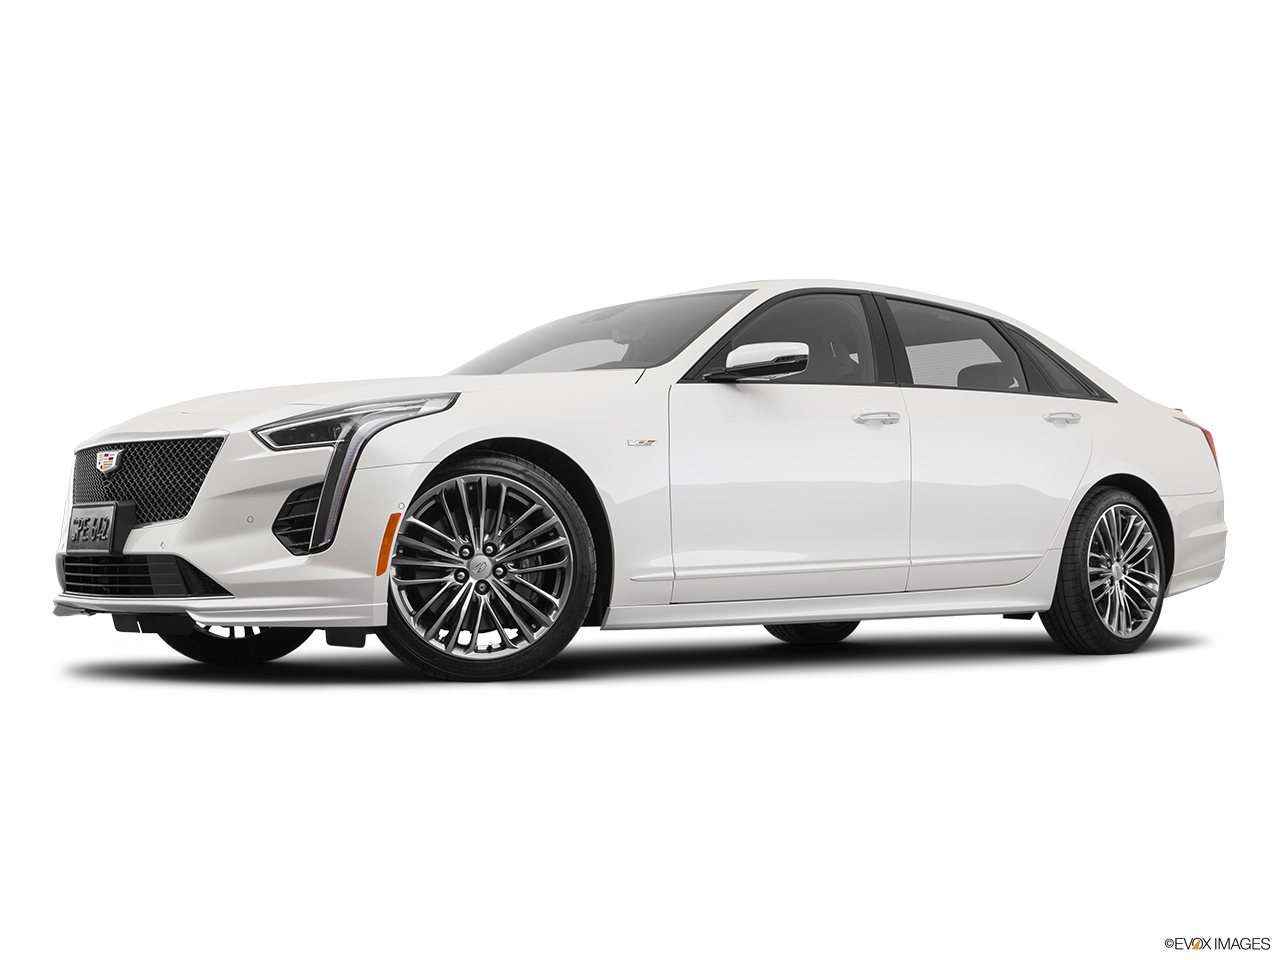 2019 Cadillac CT6-V Base Low/wide front 5/8. 